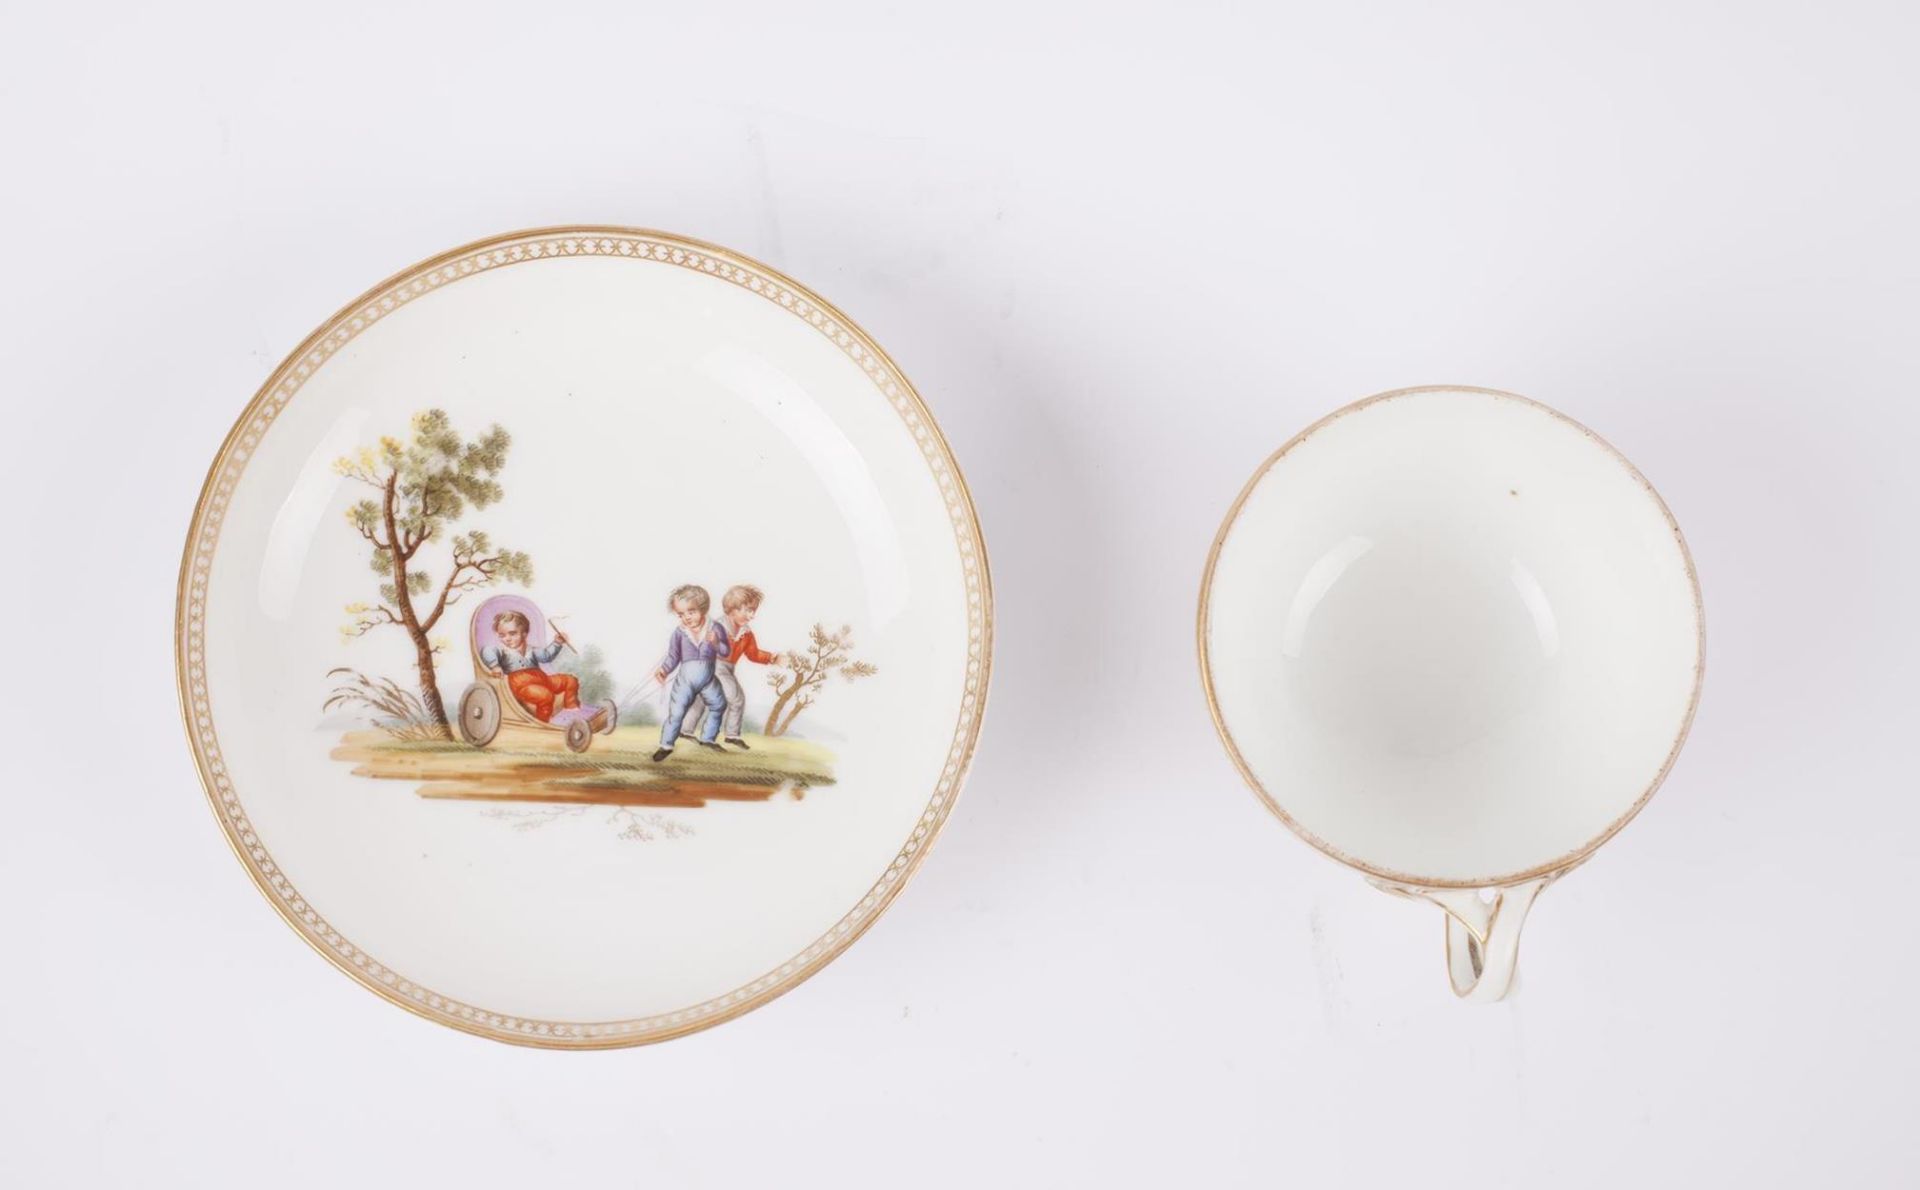 Two tea cup and saucer sets "A child's play". Popov. Moscow. 1850s. Porcelain, gilding, painting. - Bild 4 aus 8